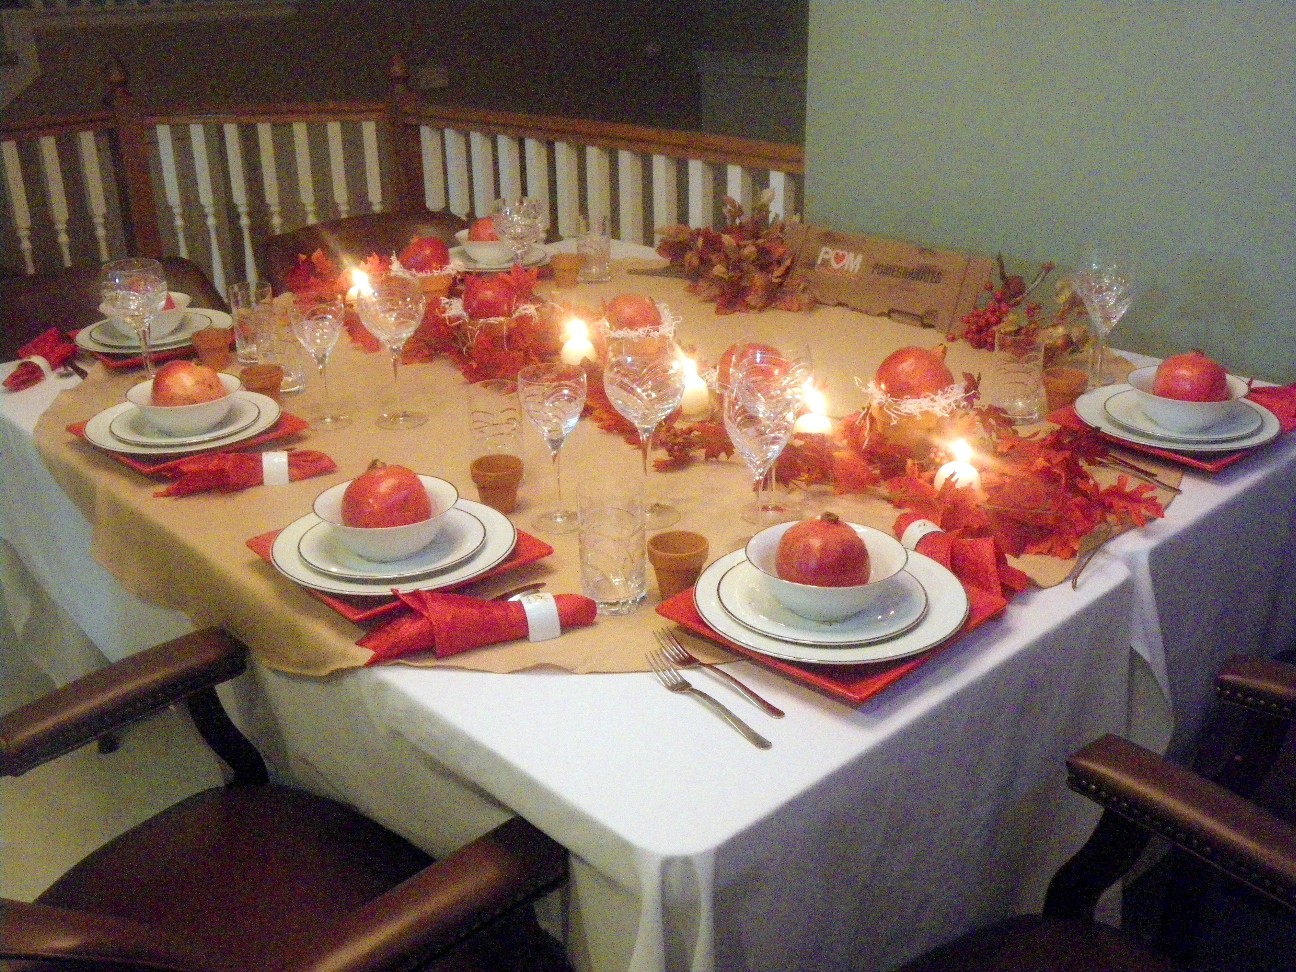 Year on the Grill: POM DINNER PARTY Decorating With Pomegranates